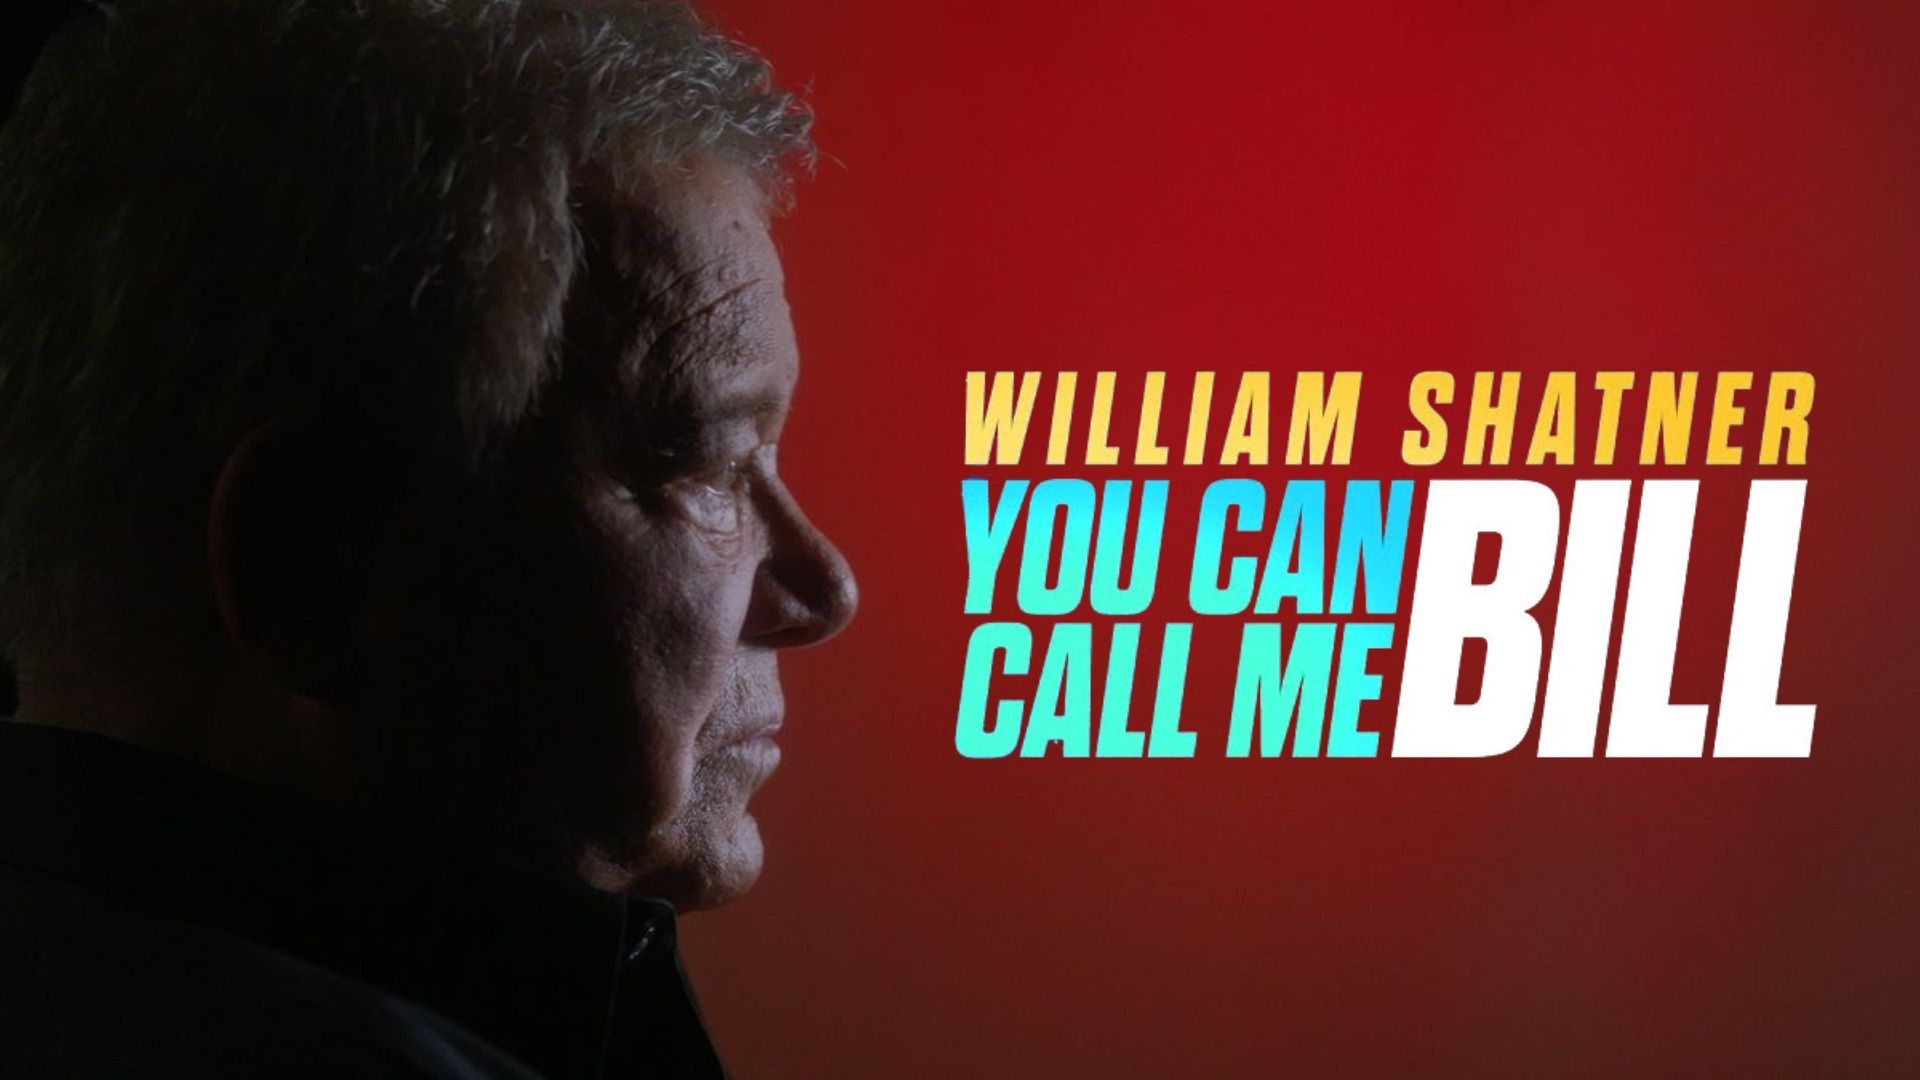 You Can Call Me Bill documentary with William Shatner profile on a red screen